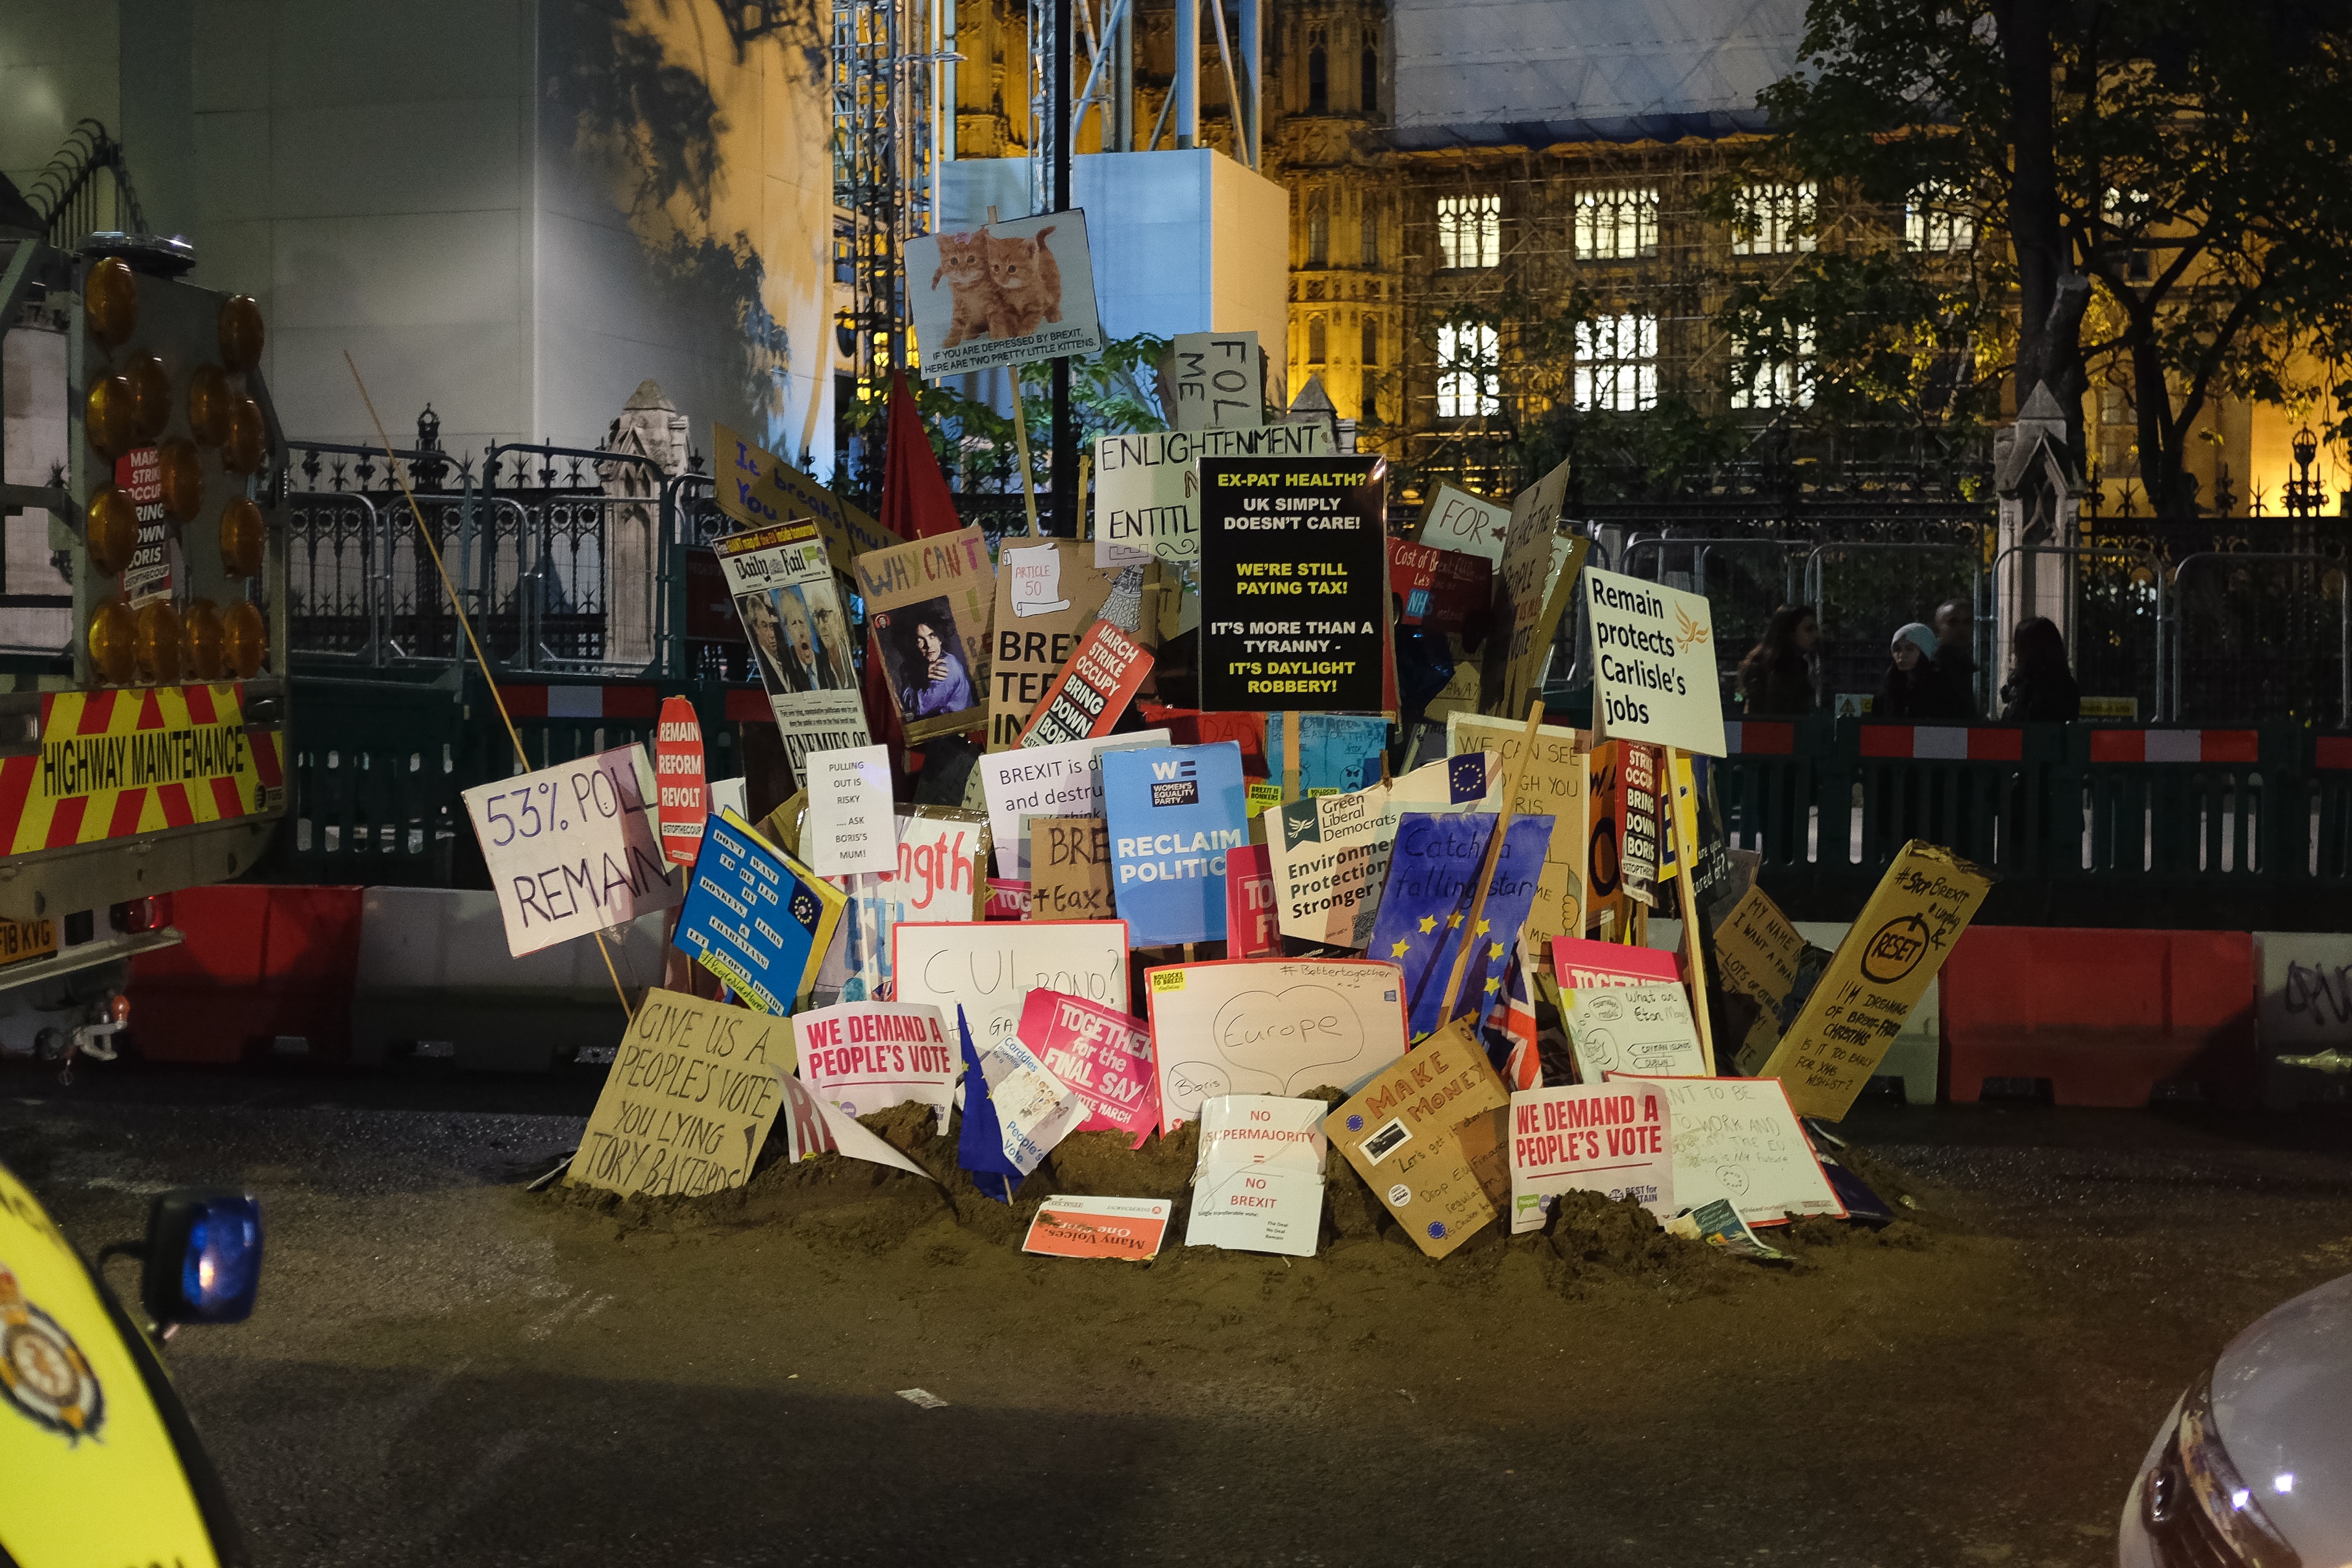 Image: Placards after an anti-Brexit demonstration, October 2019. Photo by Jannes Van den wouwer on Unsplash